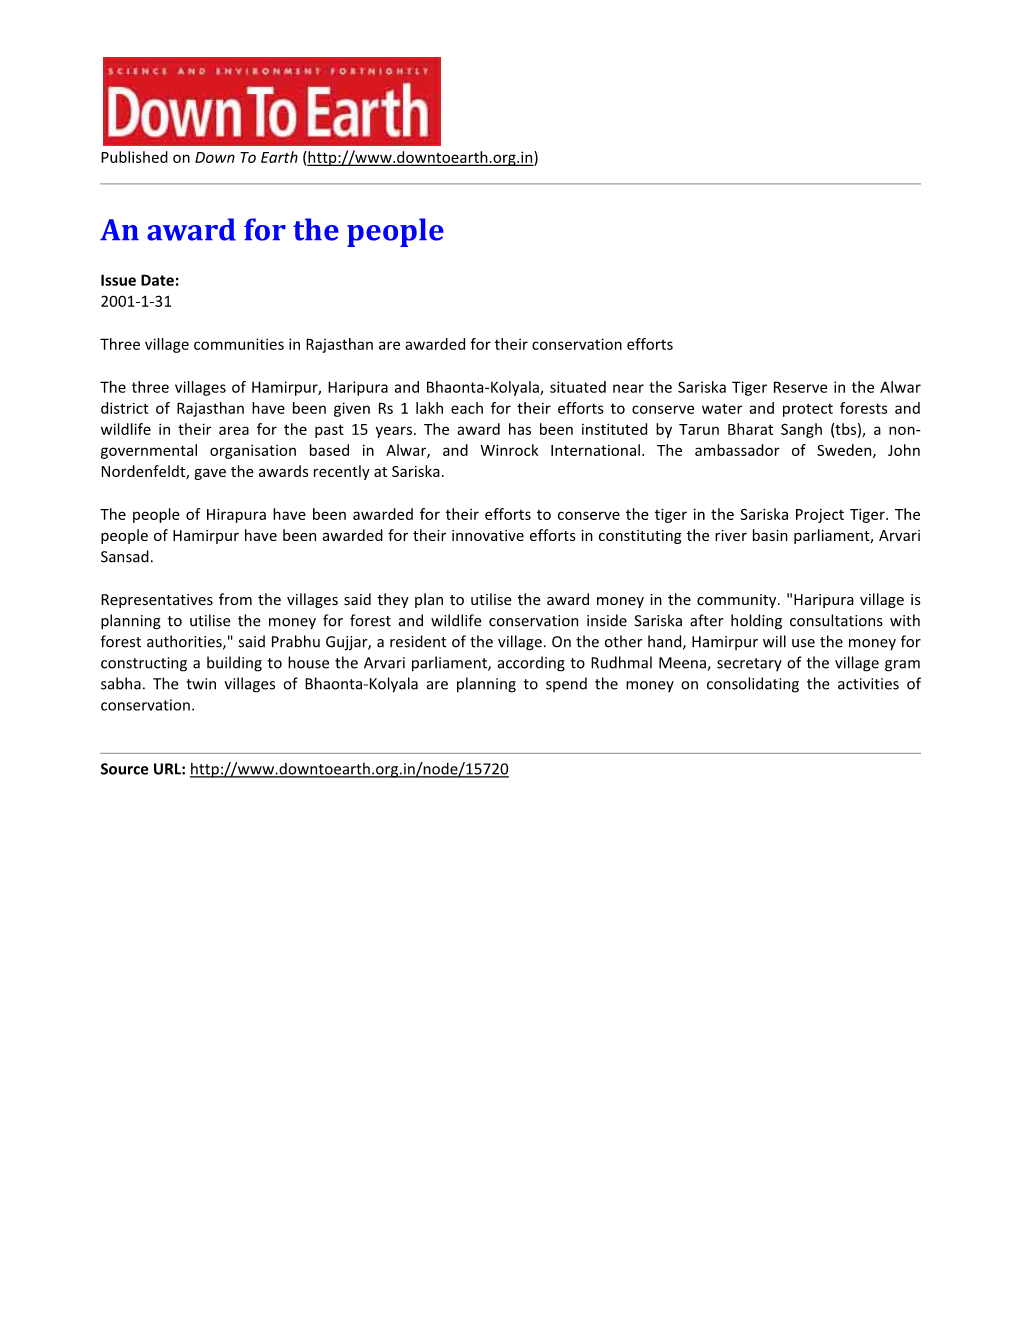 An Award for the People